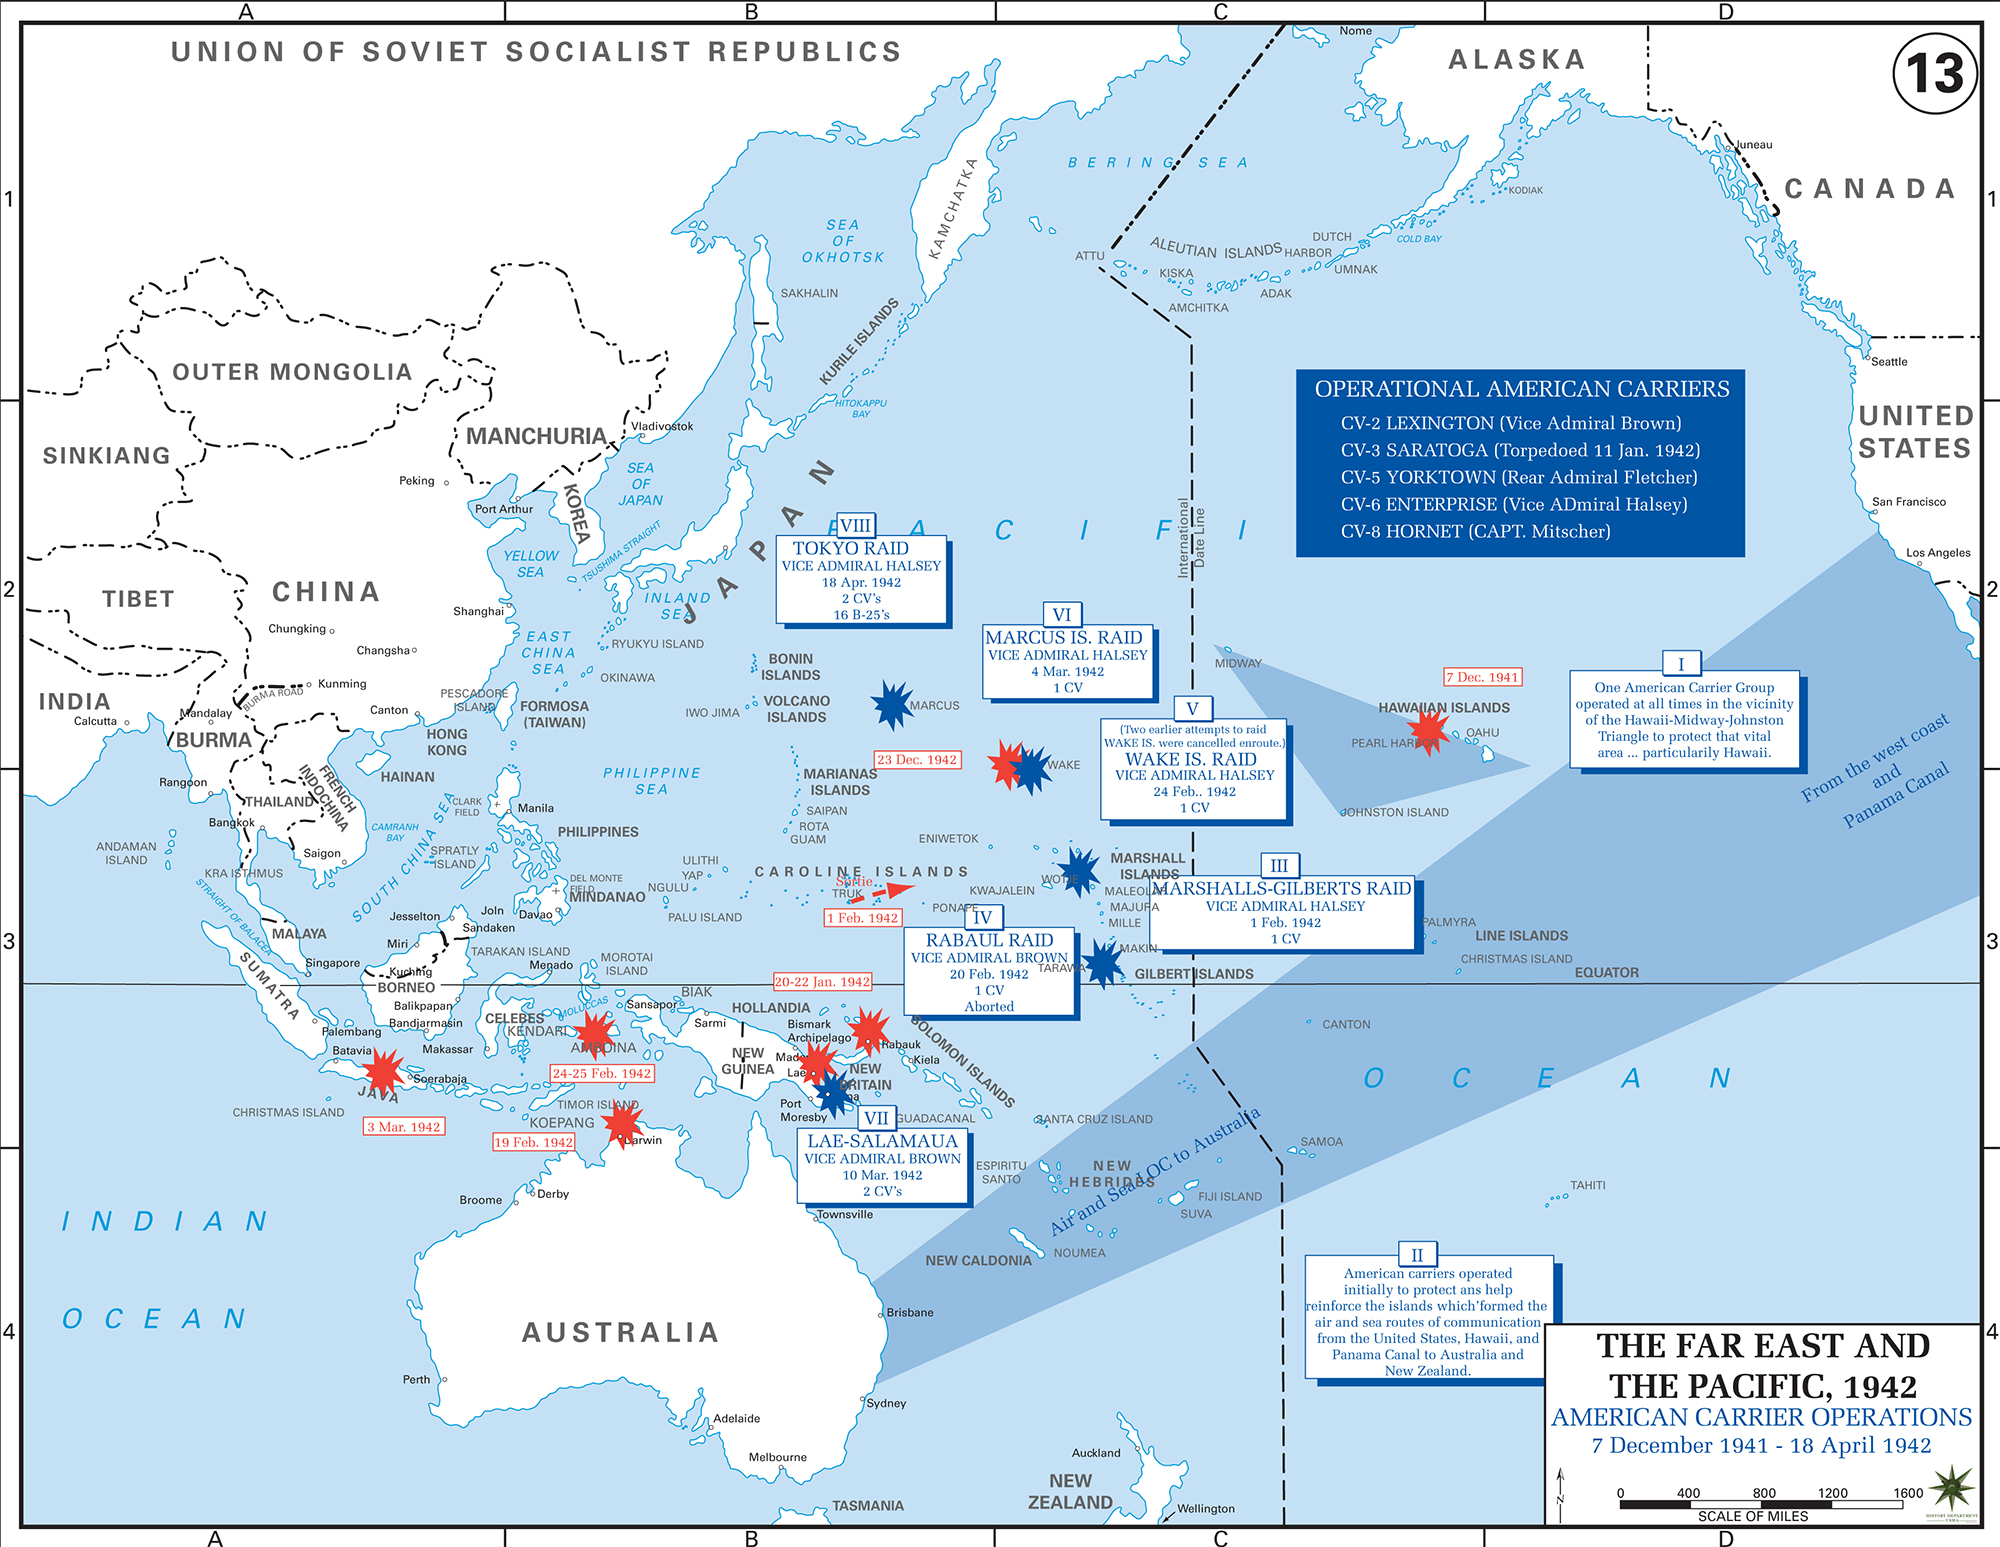 Map of World War II: The Far East and the Pacific. American Carrier Operations December 7, 1941 - April 18, 1942.